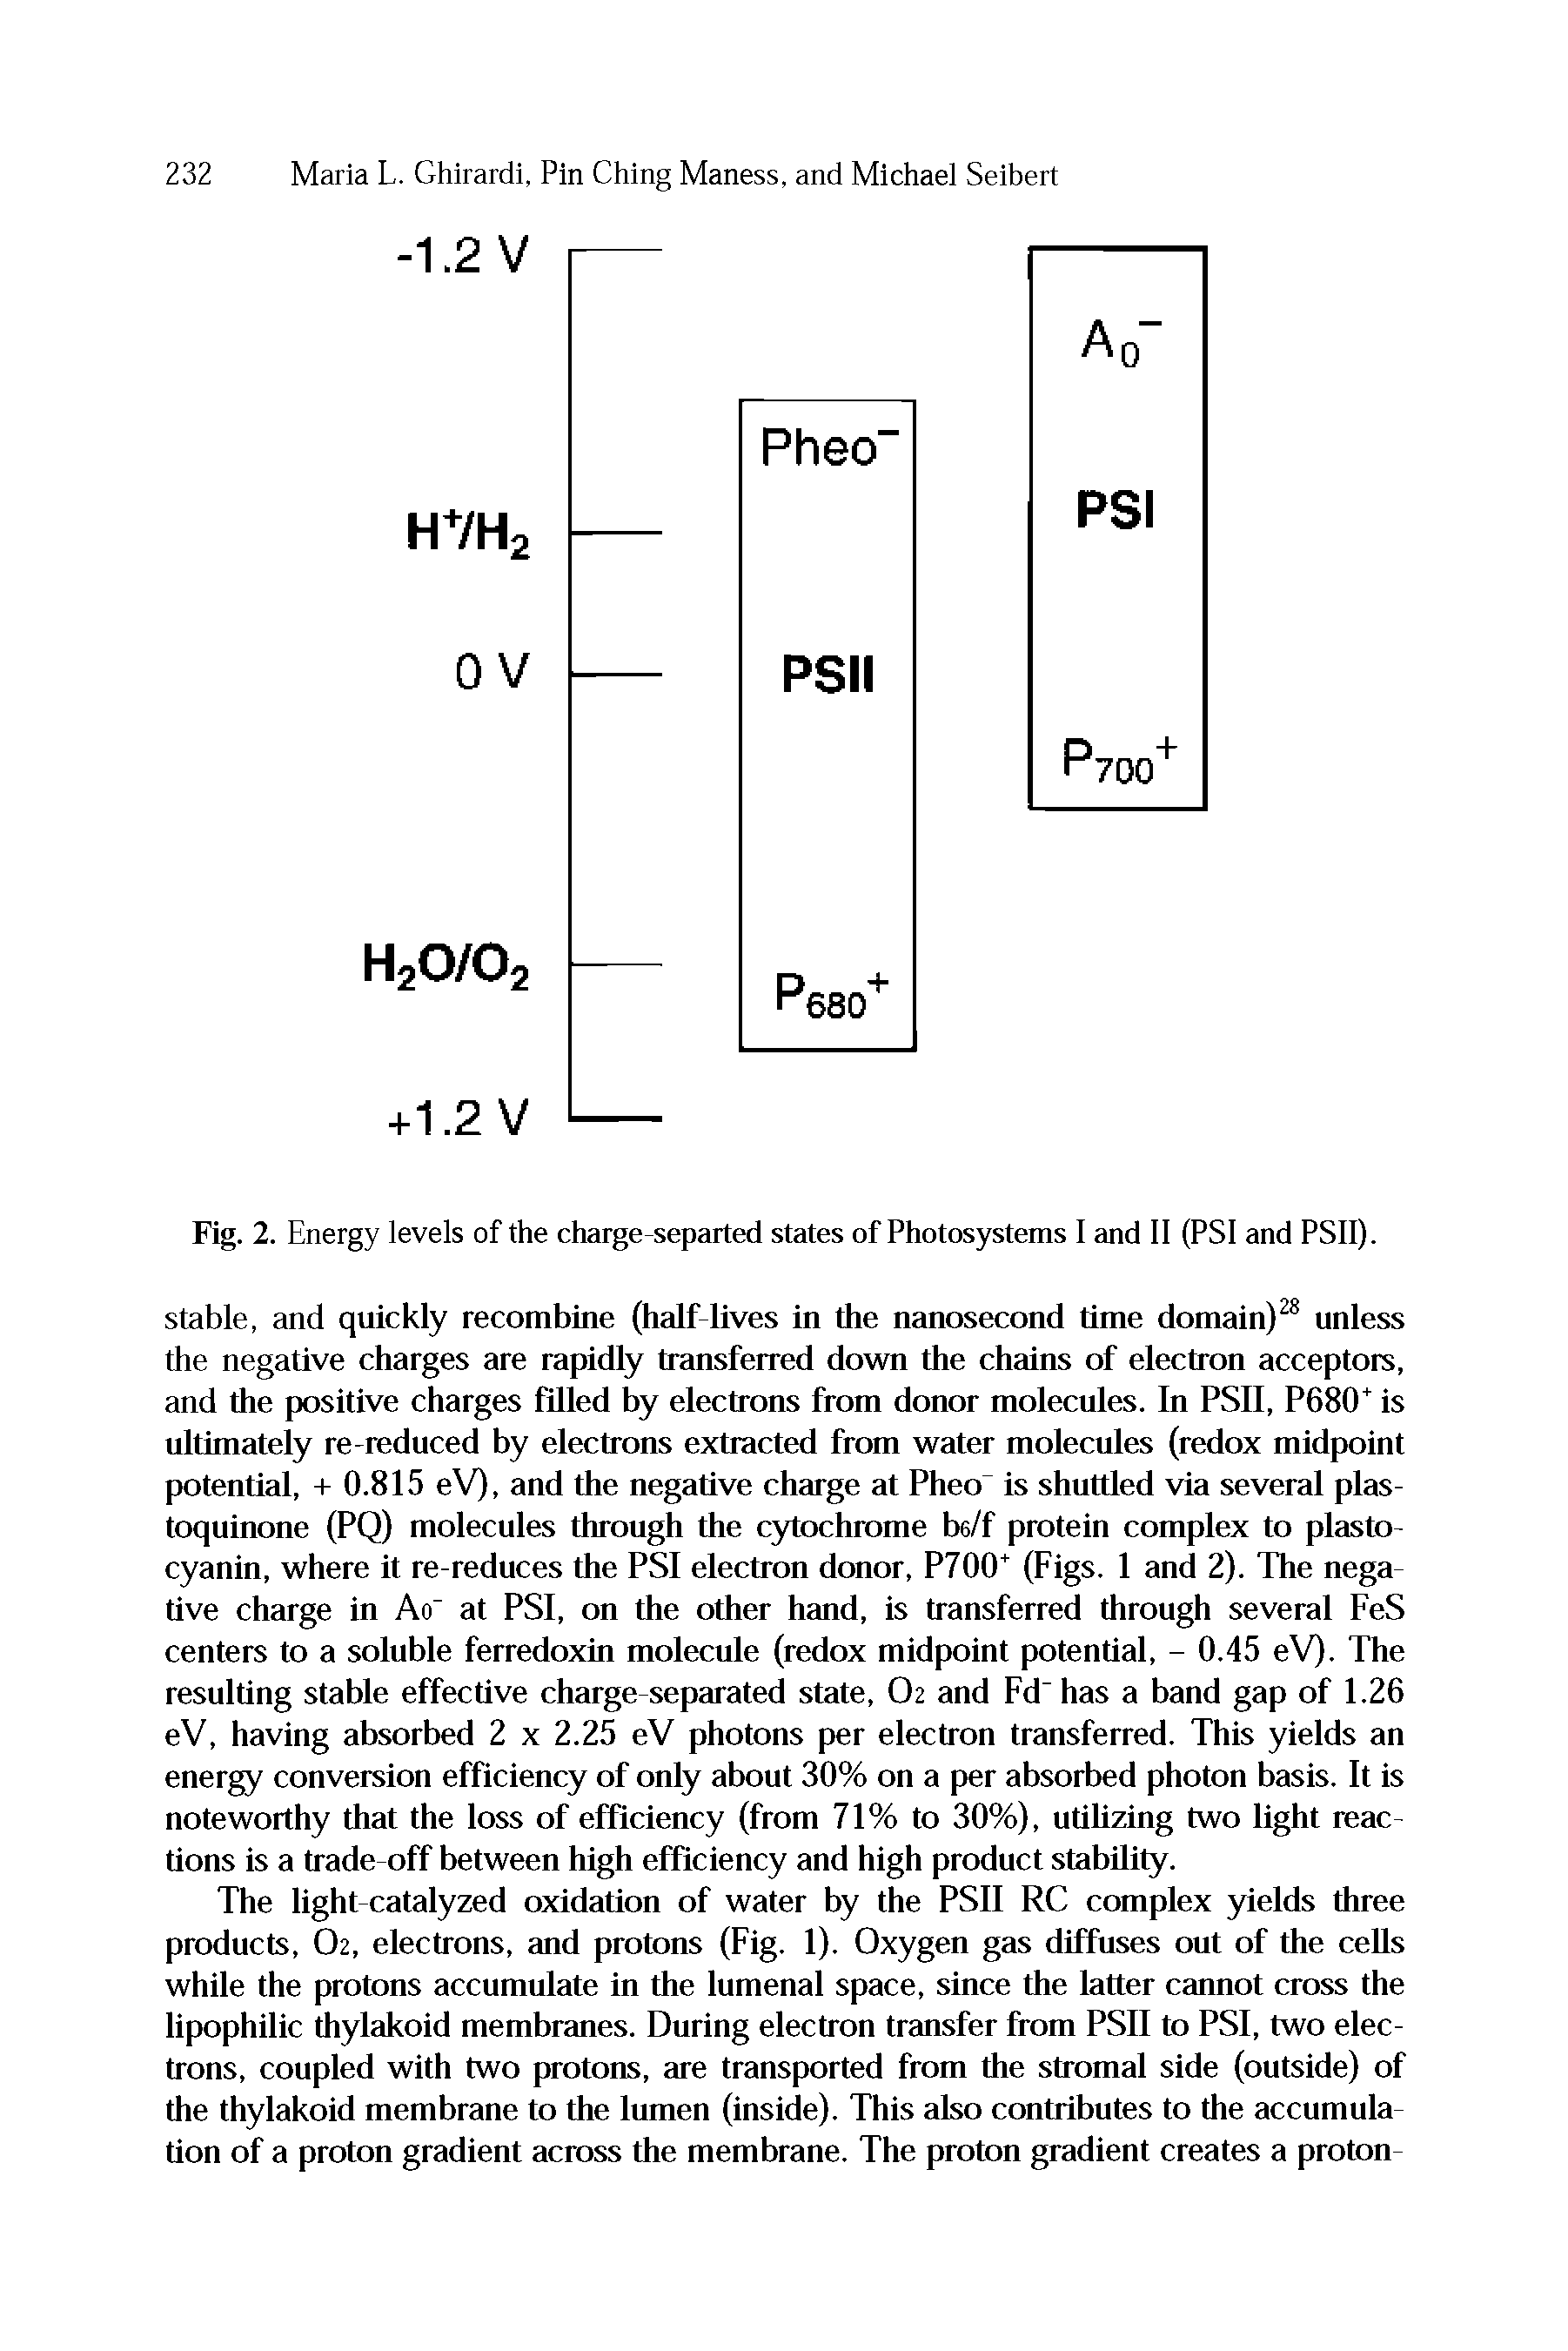 Fig. 2. Energy levels of the charge-separted states of Photosystems I and II (PSI and PSII).